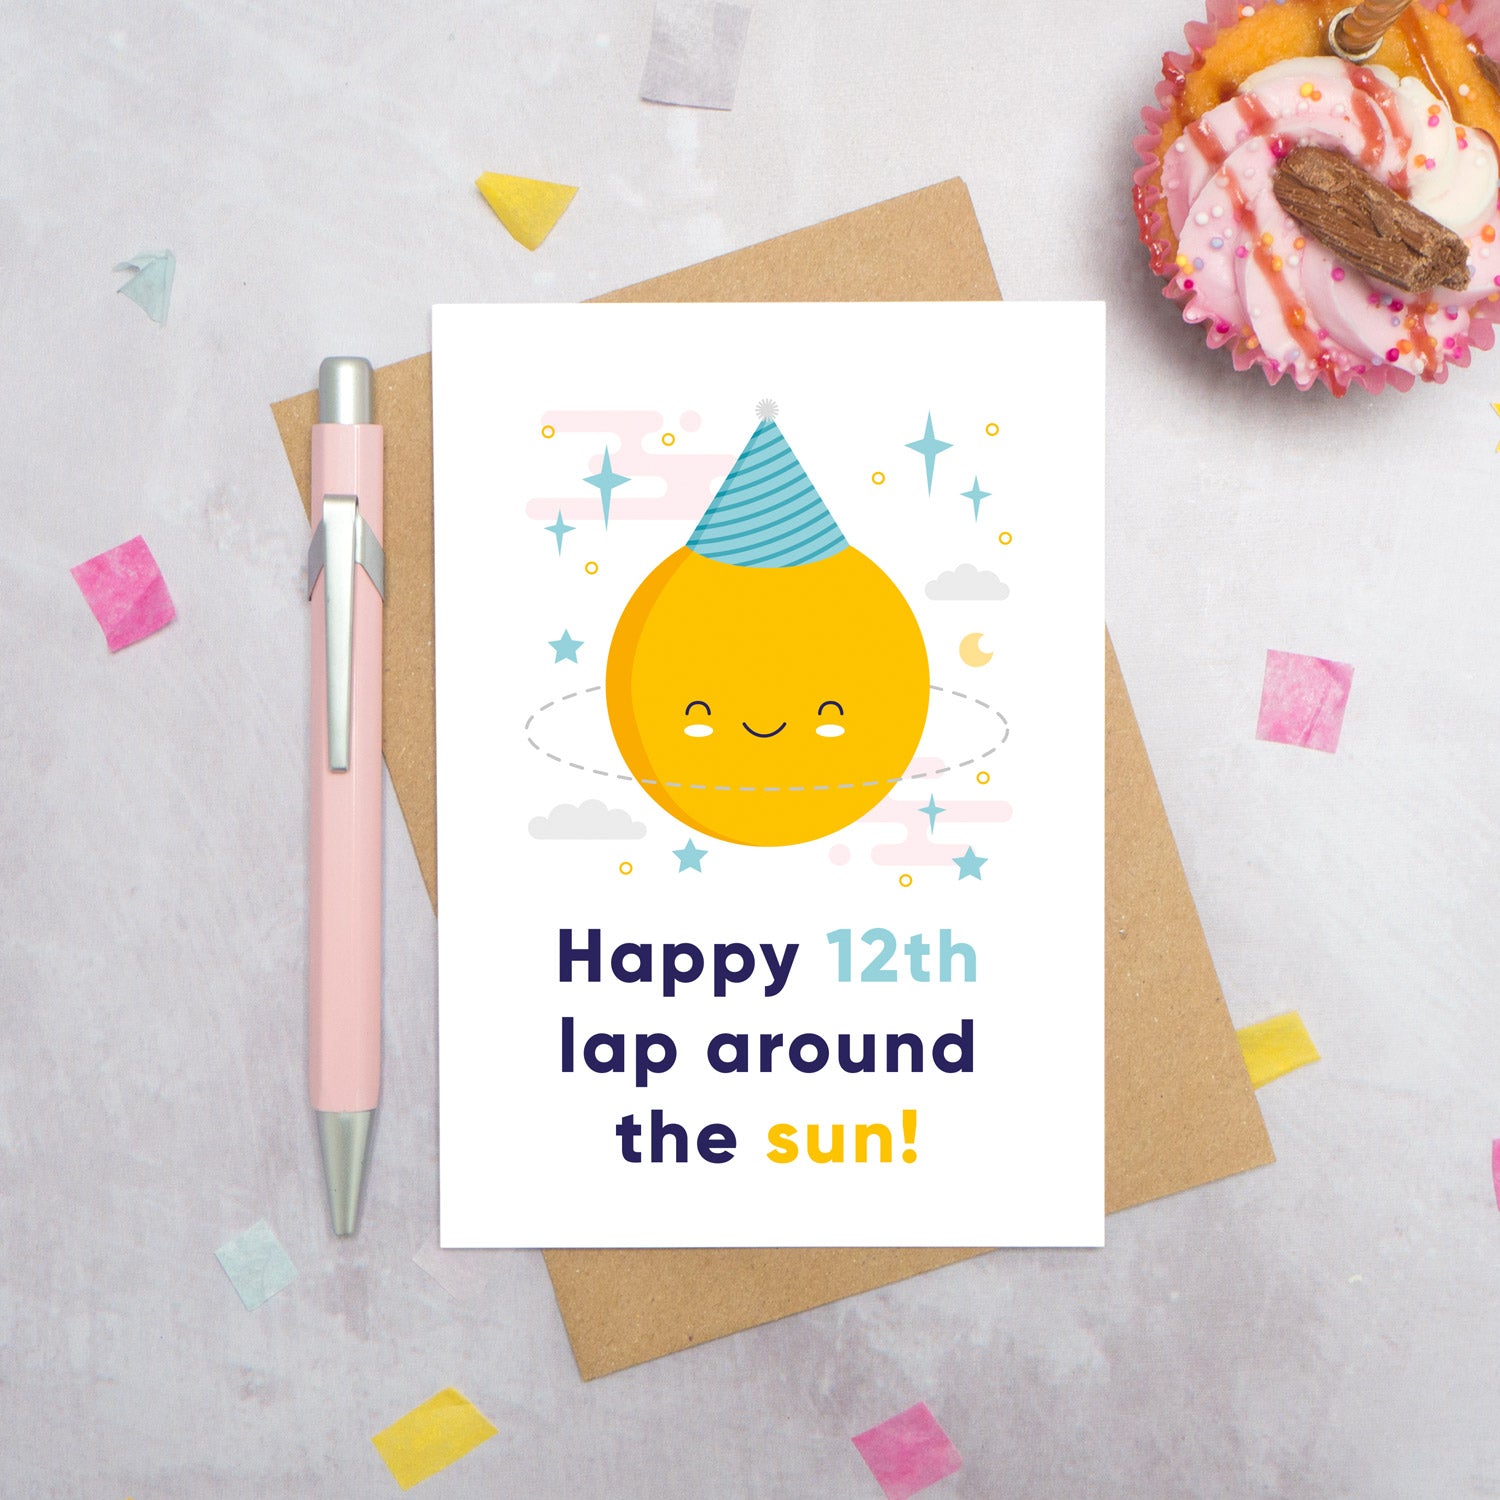 An any age birthday card featuring a happy sun in a party hat and text that reads 'Happy 12th lap around the sun'. This card has been photographed on a grey background surrounded by a cupcake, pen and confetti.